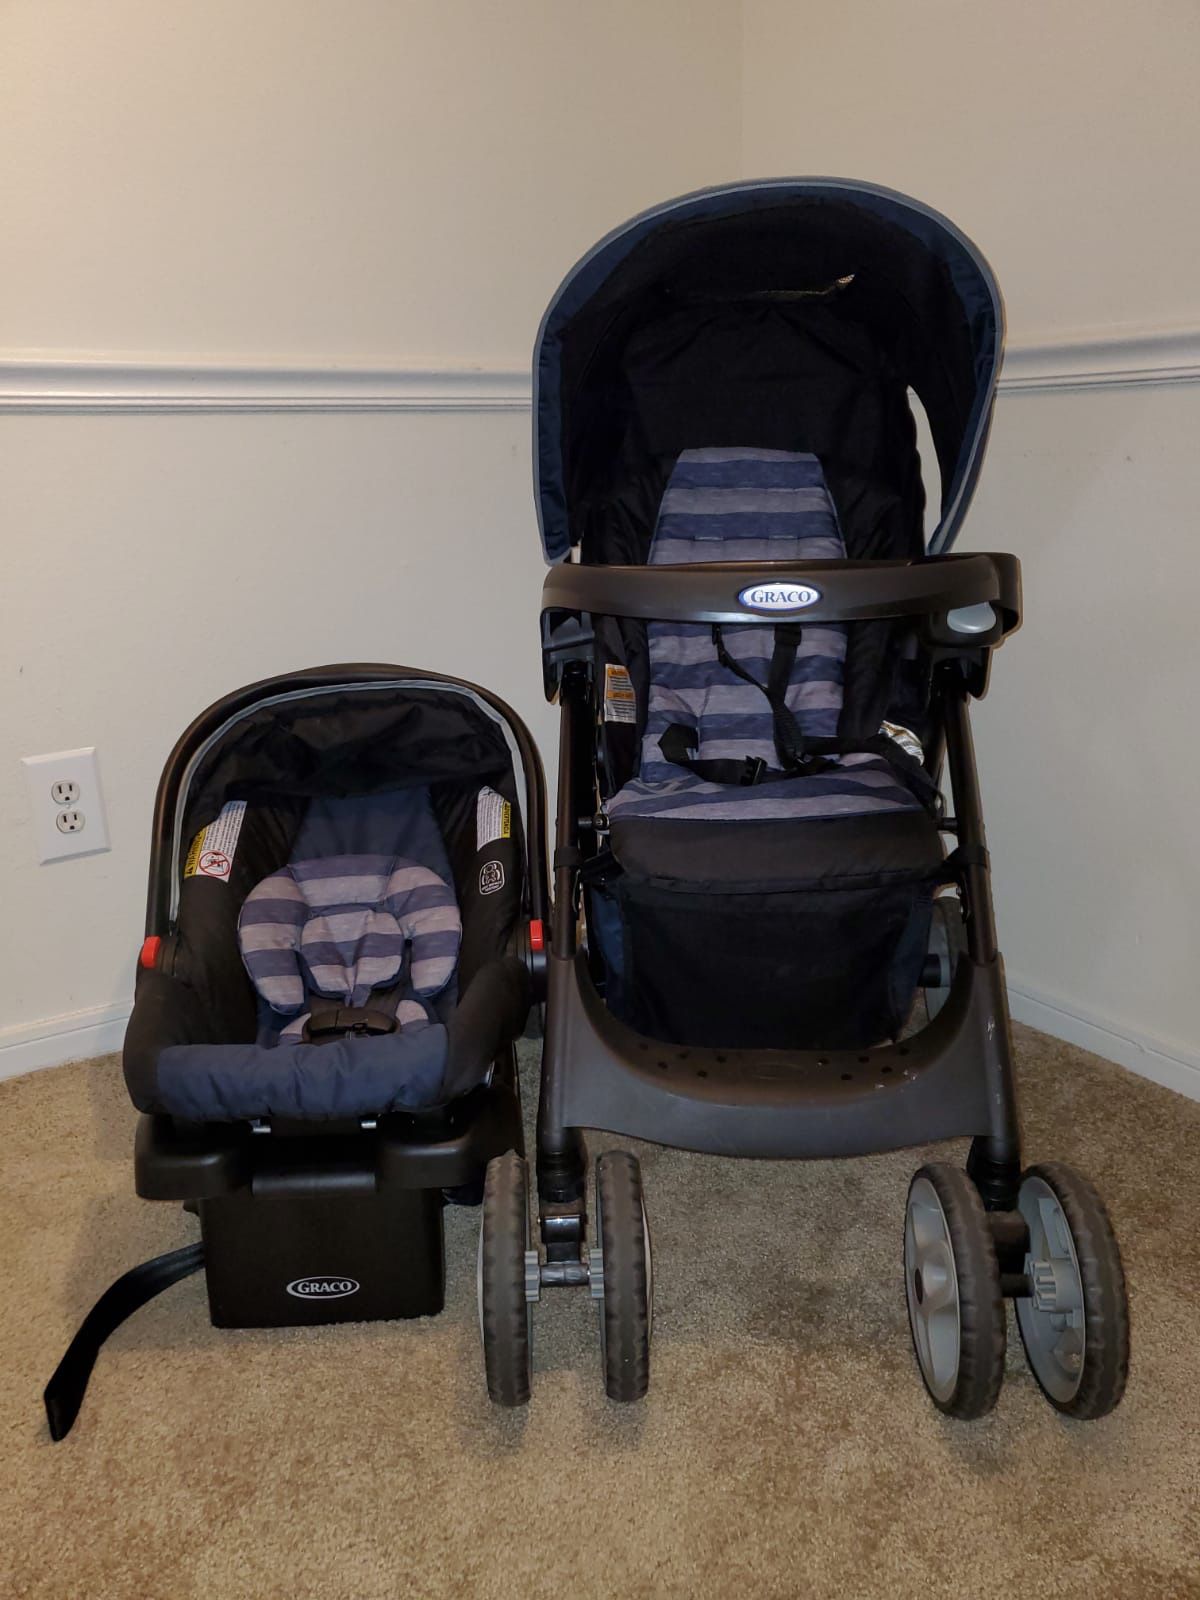 Infant car seat and stroller (baby car seat)